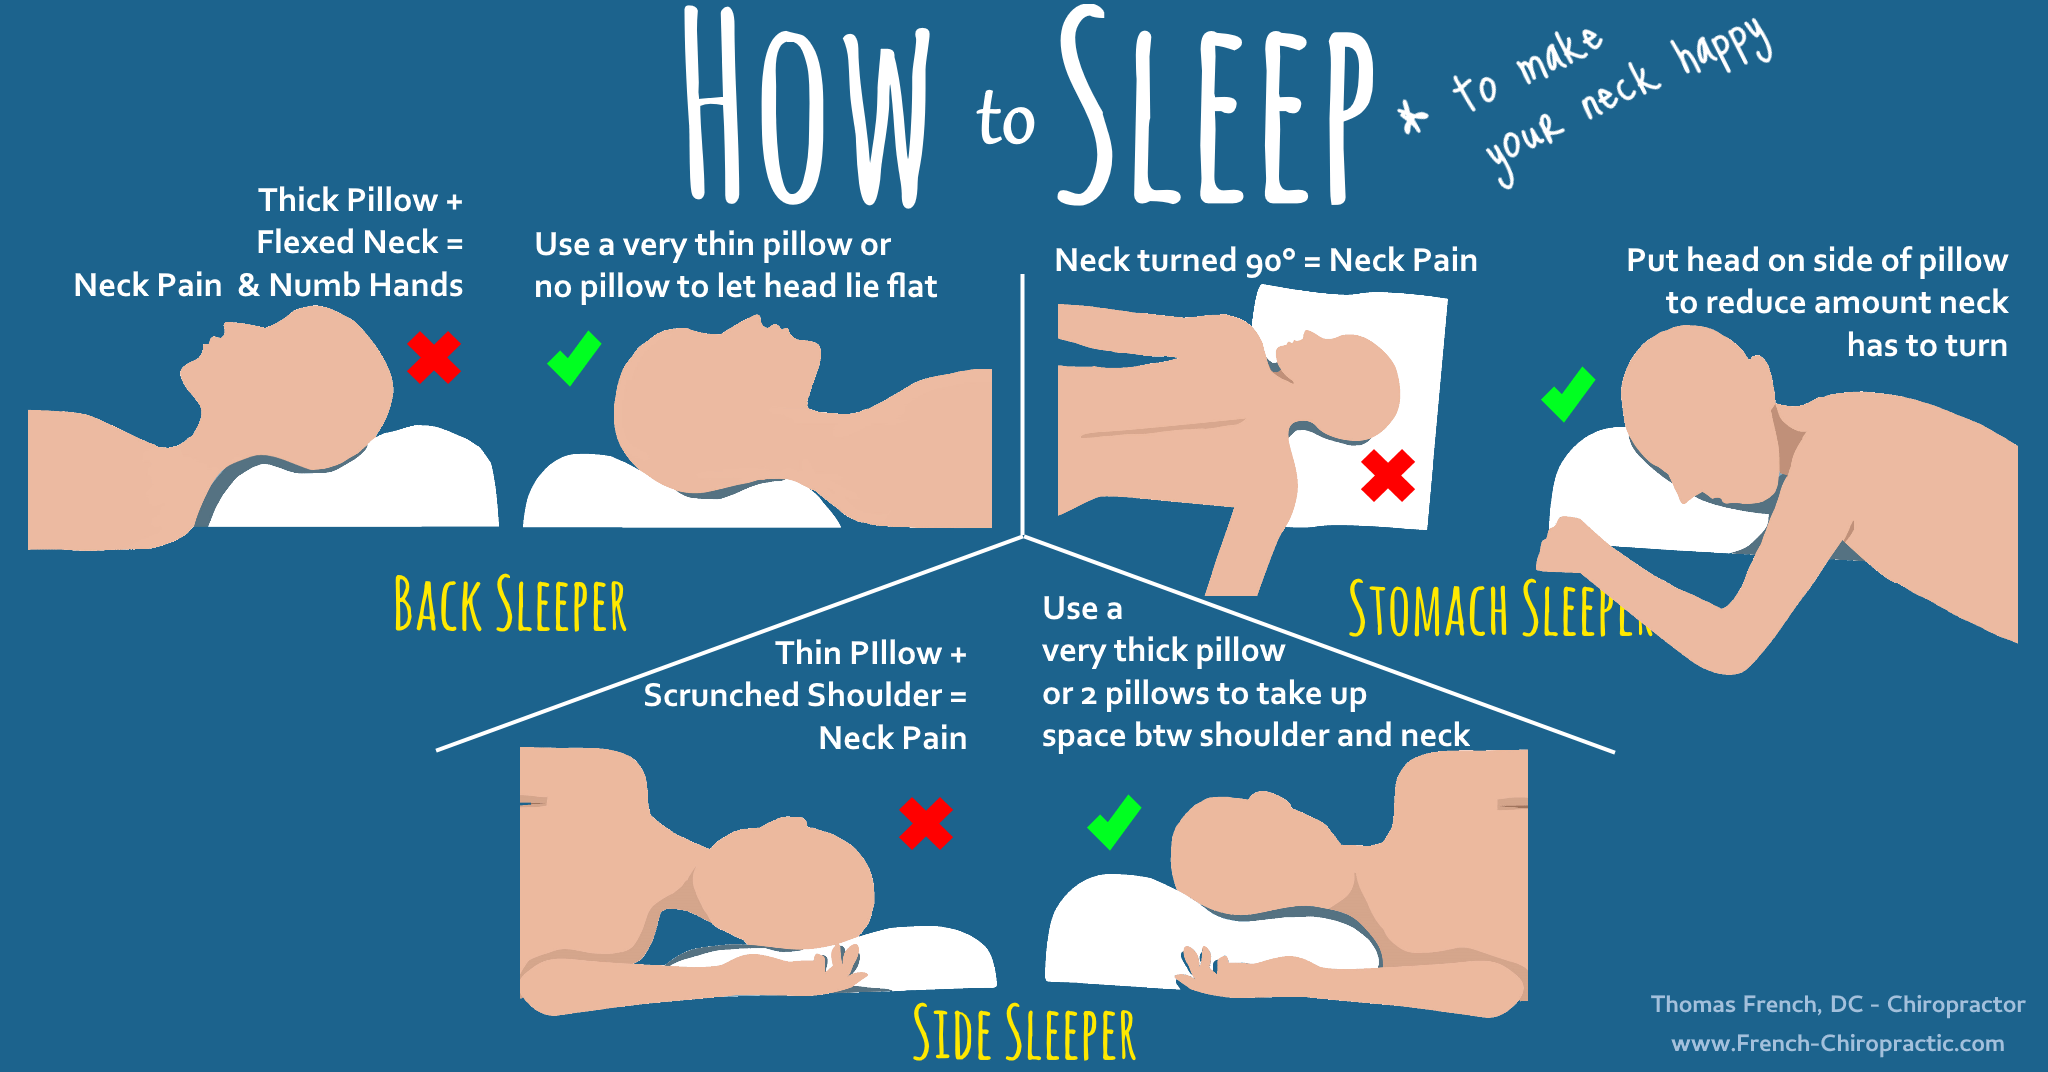 https://www.french-chiropractic.com/wp-content/uploads/2016/10/How-to-Sleep.png